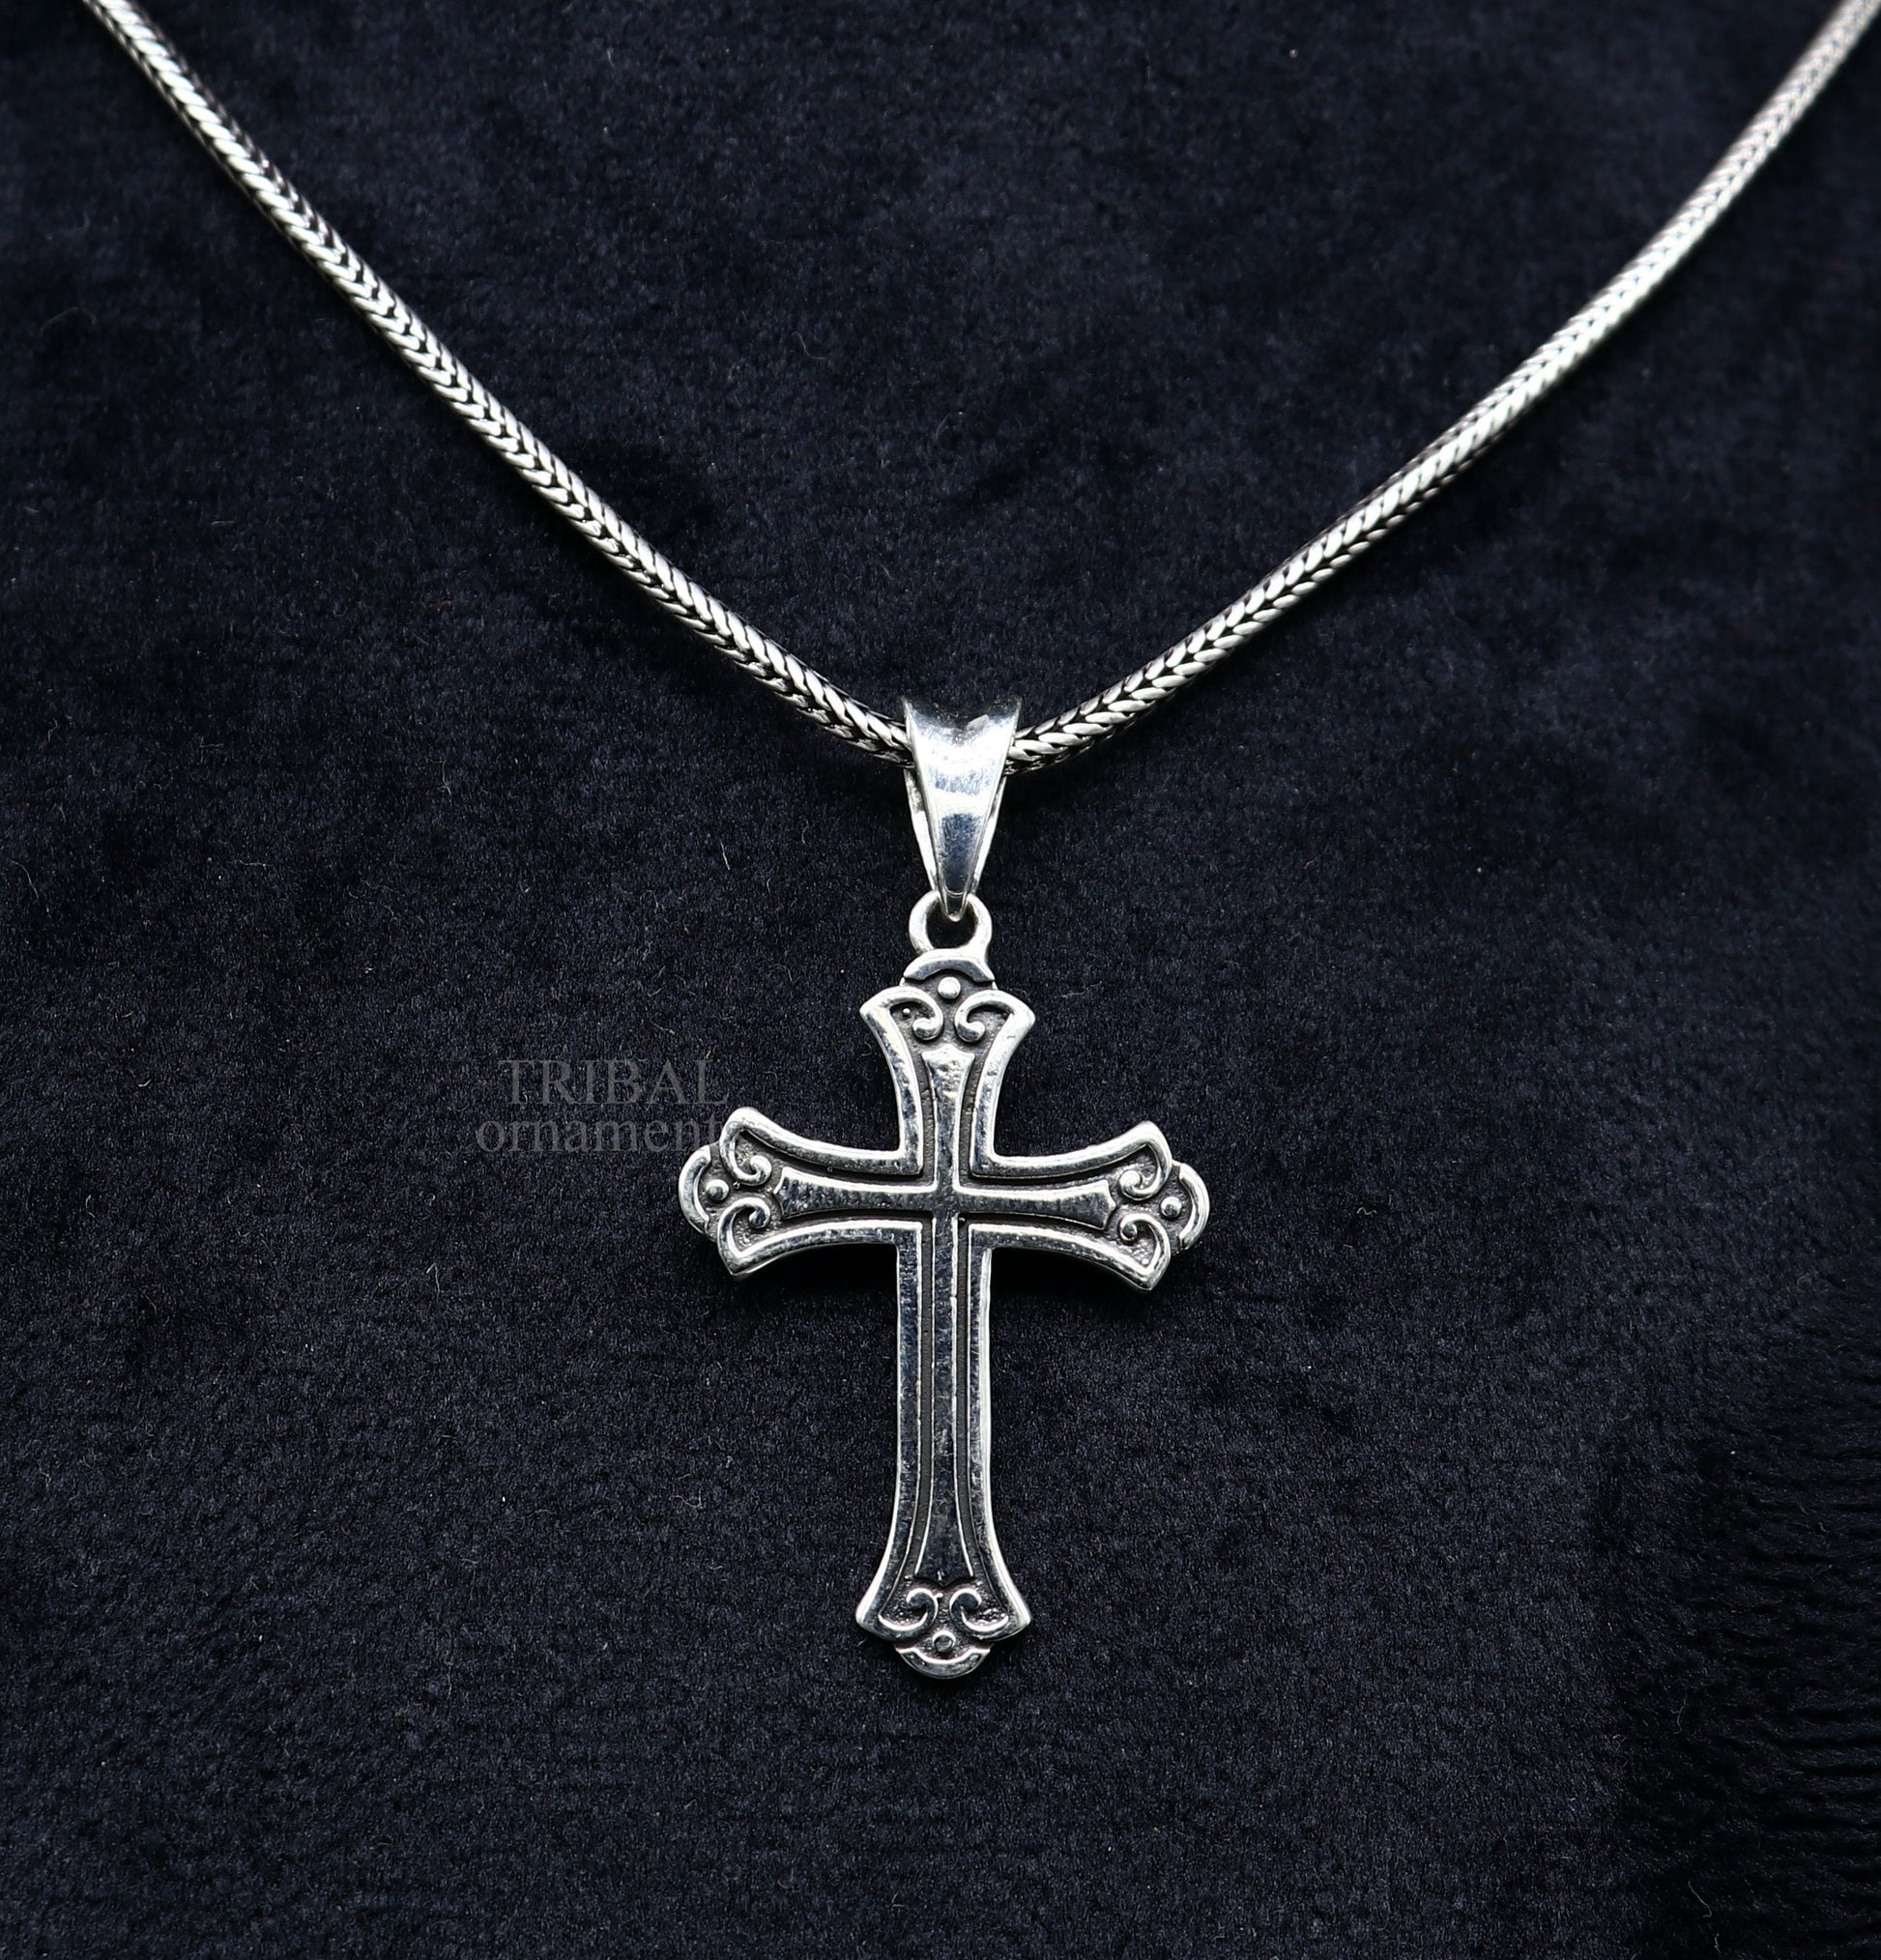 925 sterling silver holy cross pendant, excellent unique design stylish unisex exclusive gift pendant jewelry from india ssp1605 - TRIBAL ORNAMENTS